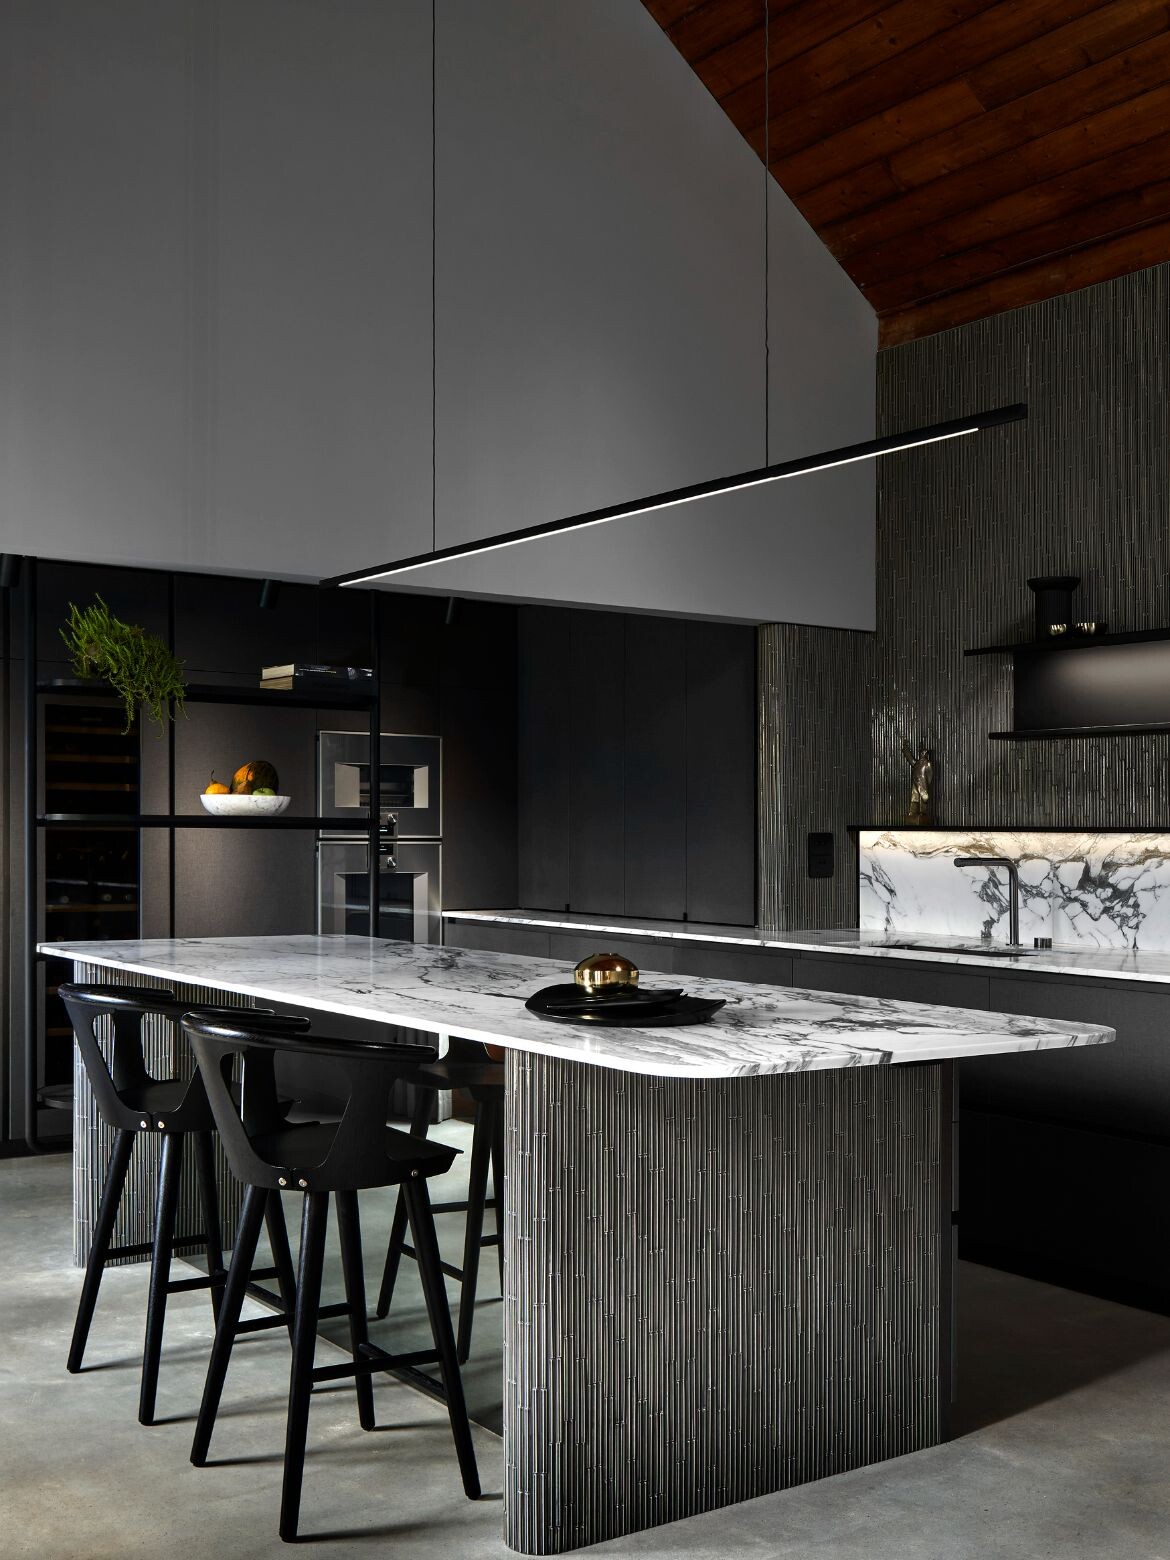 Designed or built an amazing kitchen? Here’s your last chance for glory